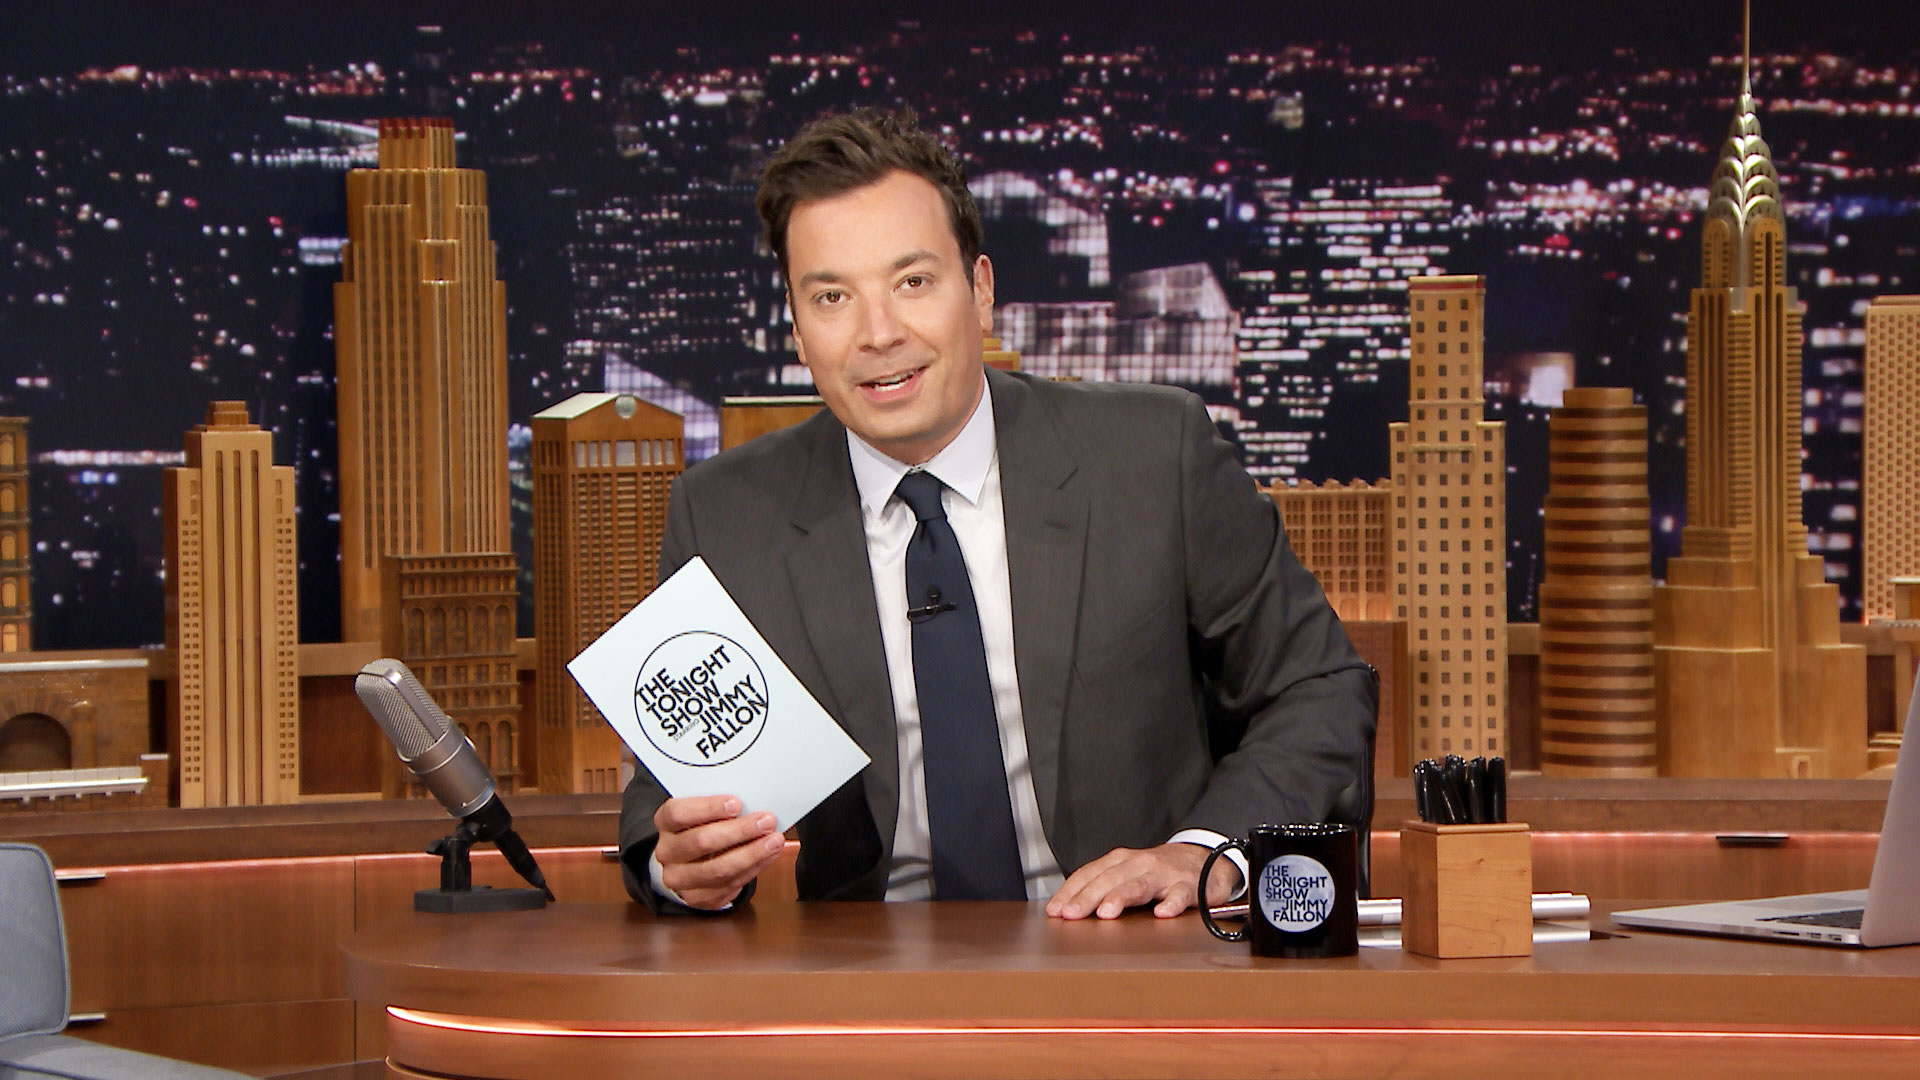 Watch The Tonight Show Starring Jimmy Fallon Highlight: Pros and Cons